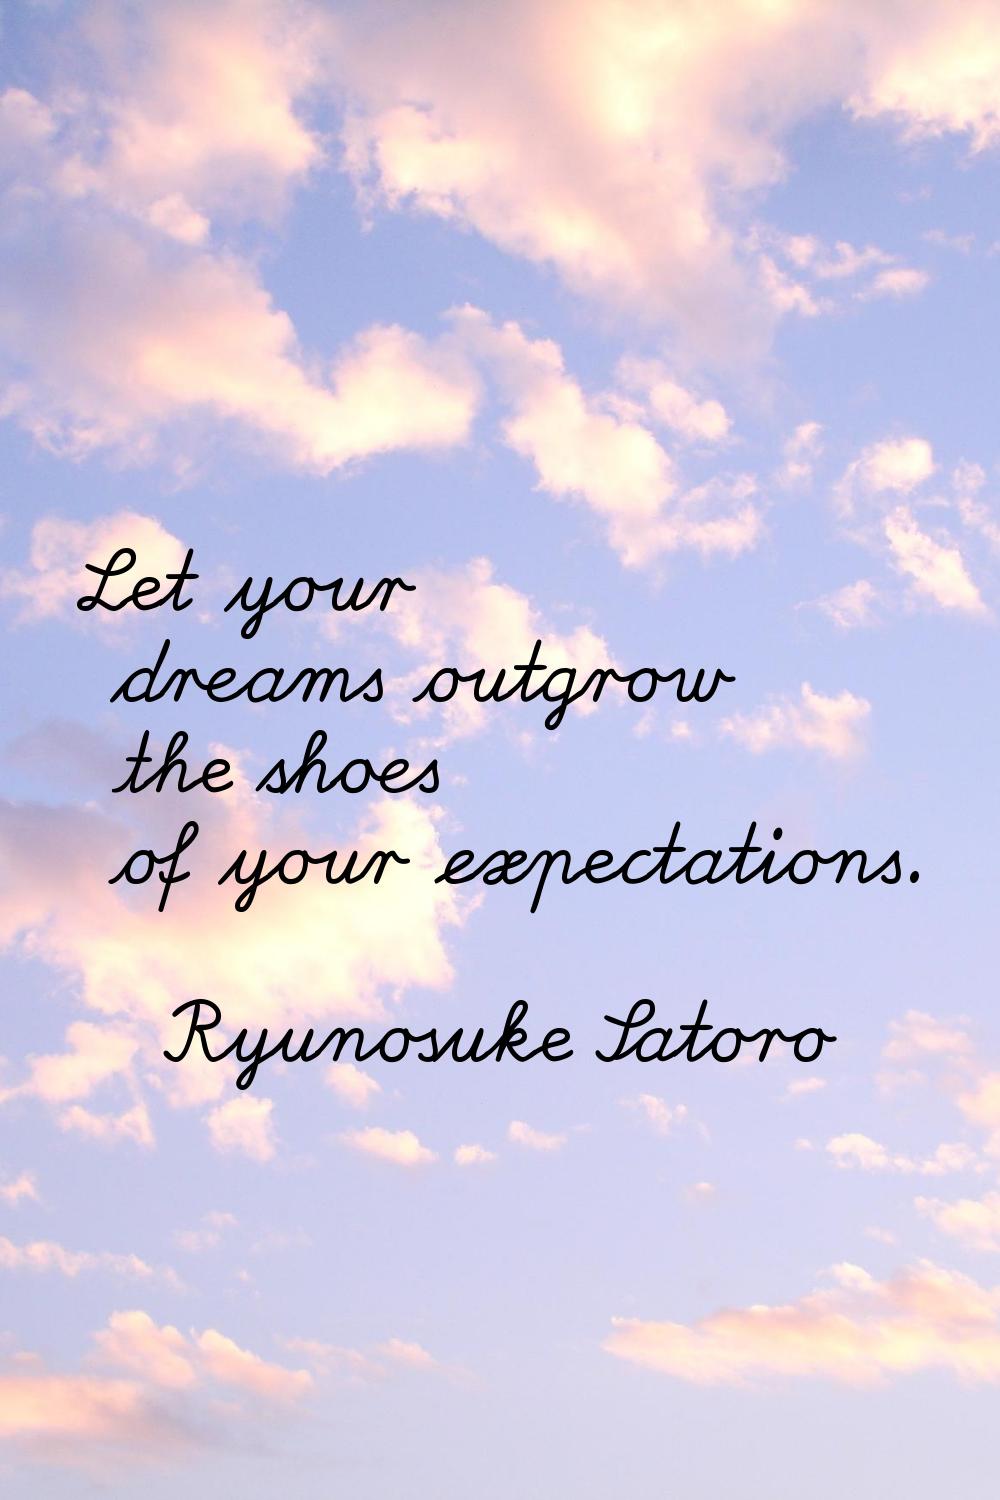 Let your dreams outgrow the shoes of your expectations.